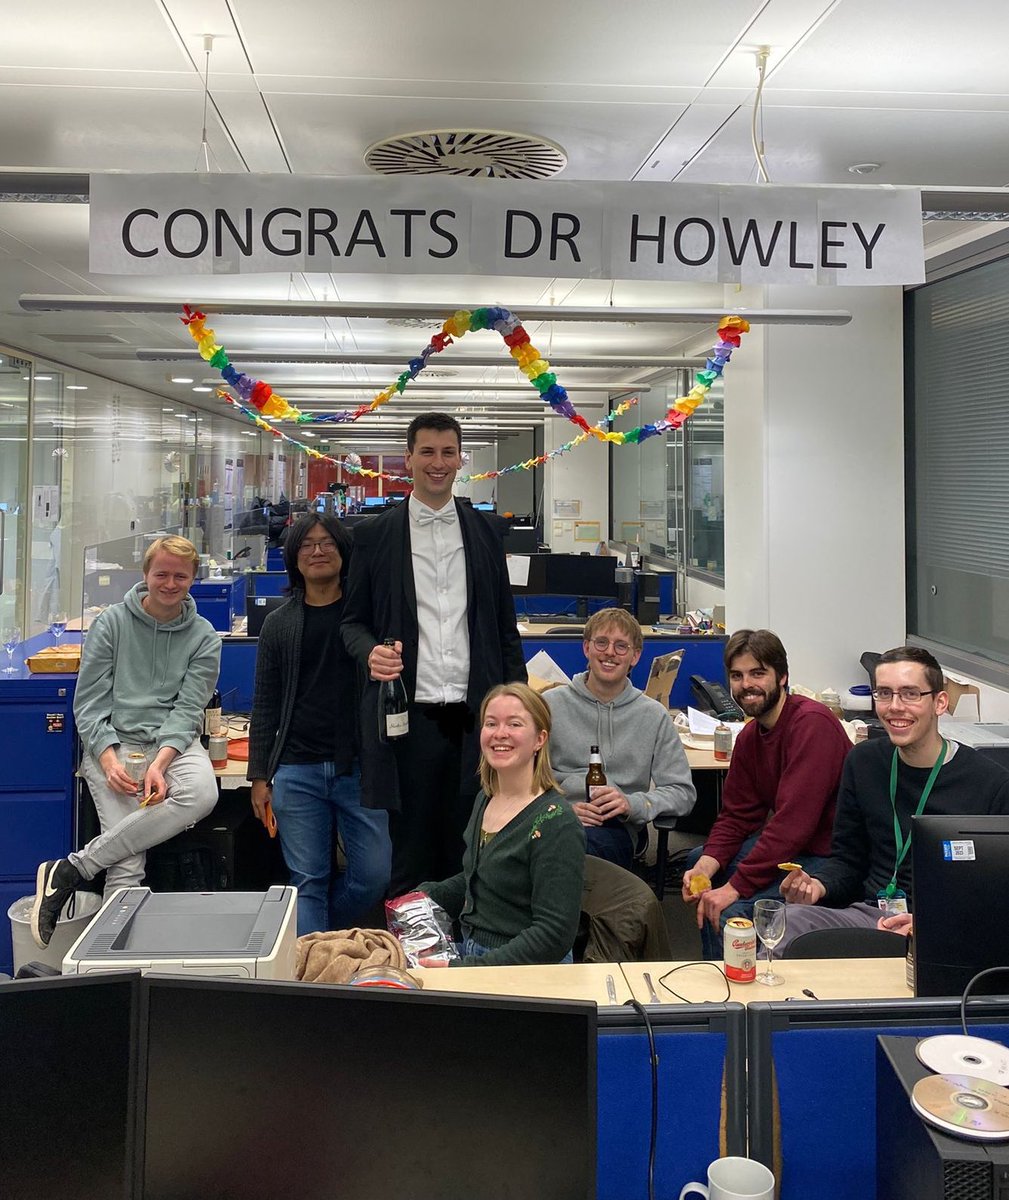 #PhDone 🎉 thrilled to have passed my PhD viva this week with minor corrections! It is surreal that this is the end of my journey in Oxford, but I couldn’t be happier with my time here and for all of the friends I’ve been lucky enough to make along the way